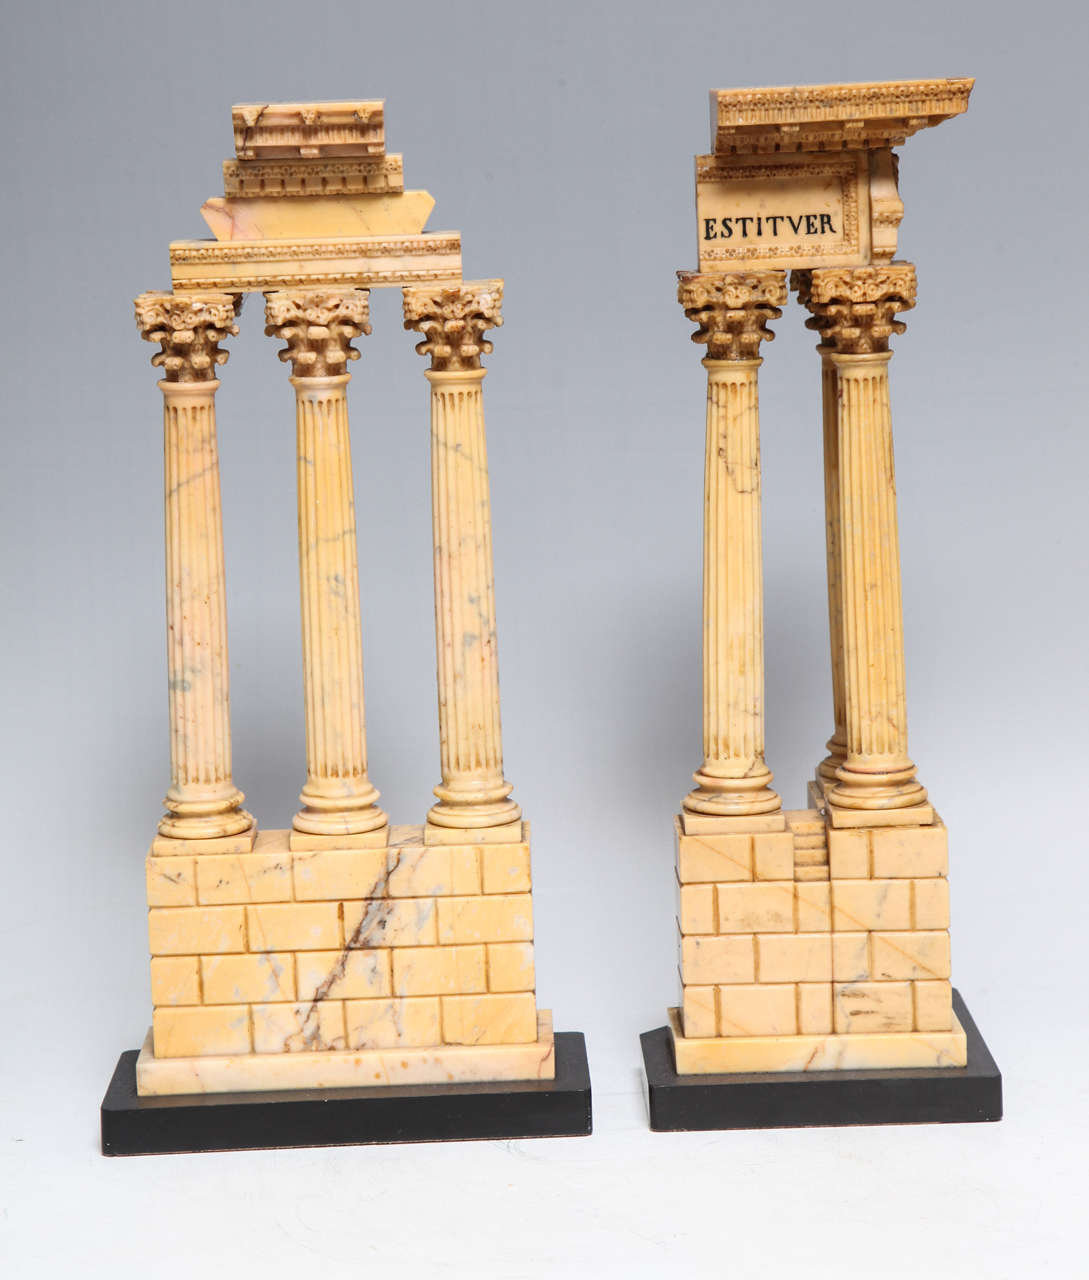 A very fine and early pair of Roman Neoclassical Period Grand Tour Sienna marble models of the Temple of Castor and Pollux and the temple of Vespasian, early 1800's Italian.

In the 18th and 19th centuries no gentlemen's education was considered